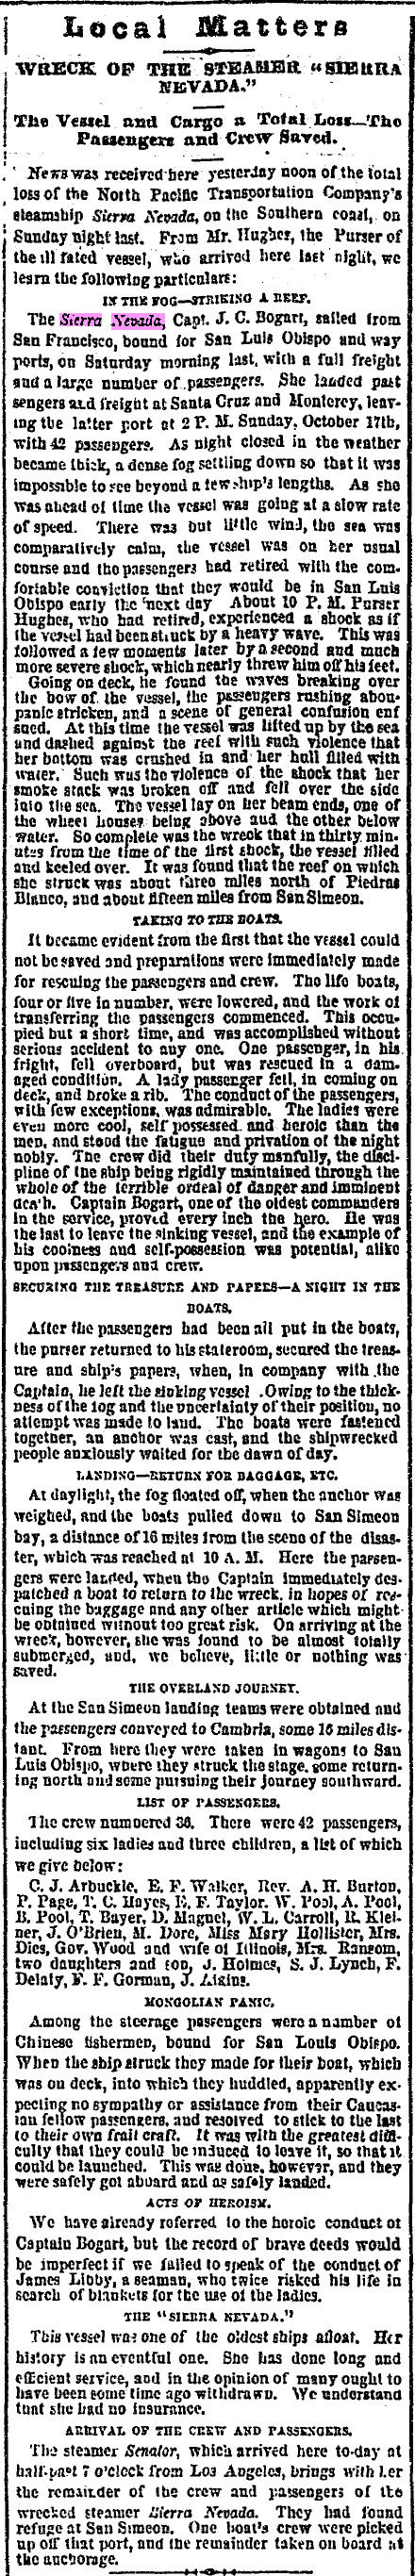 Newspaper clipping from Daily Evening Bulletin San Francisco 21OCT1869 of Sierra Nevada shipwreck